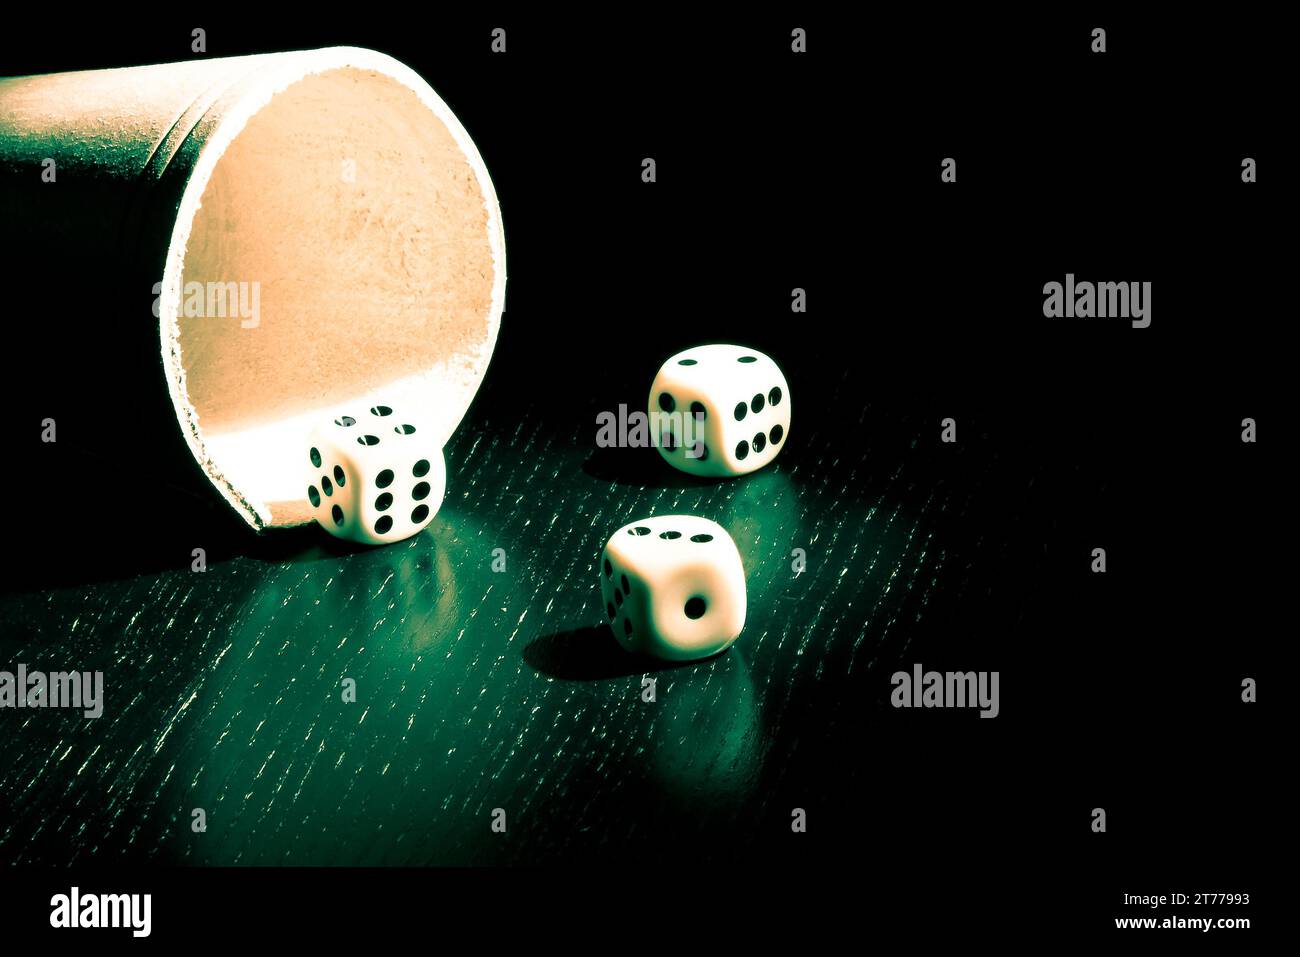 dice near a container under a green light Stock Photo